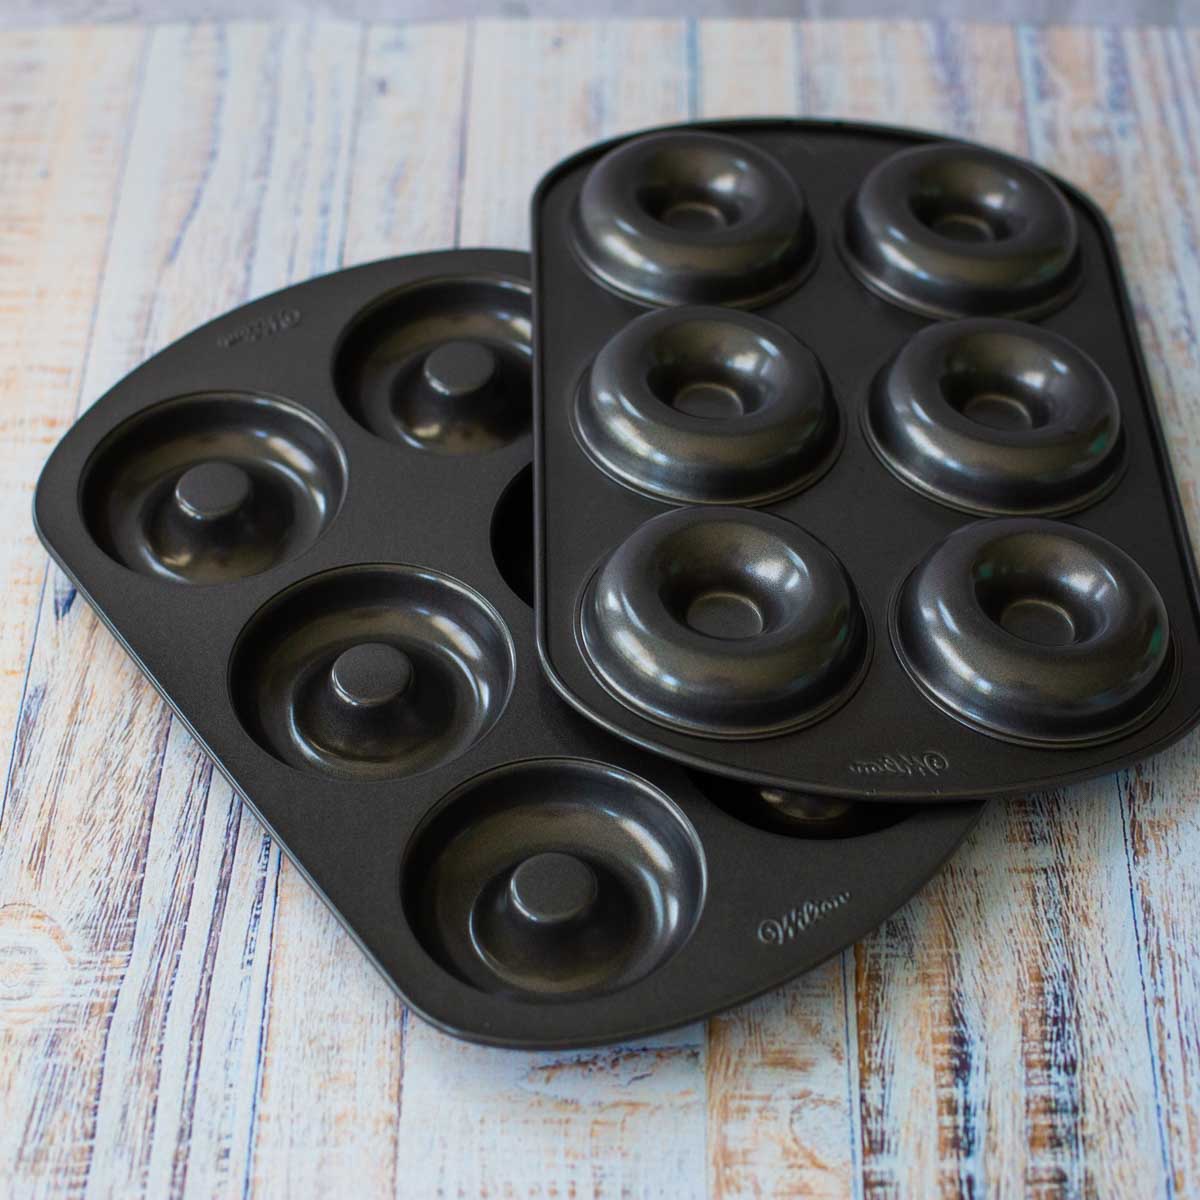 A pair of donut pans.